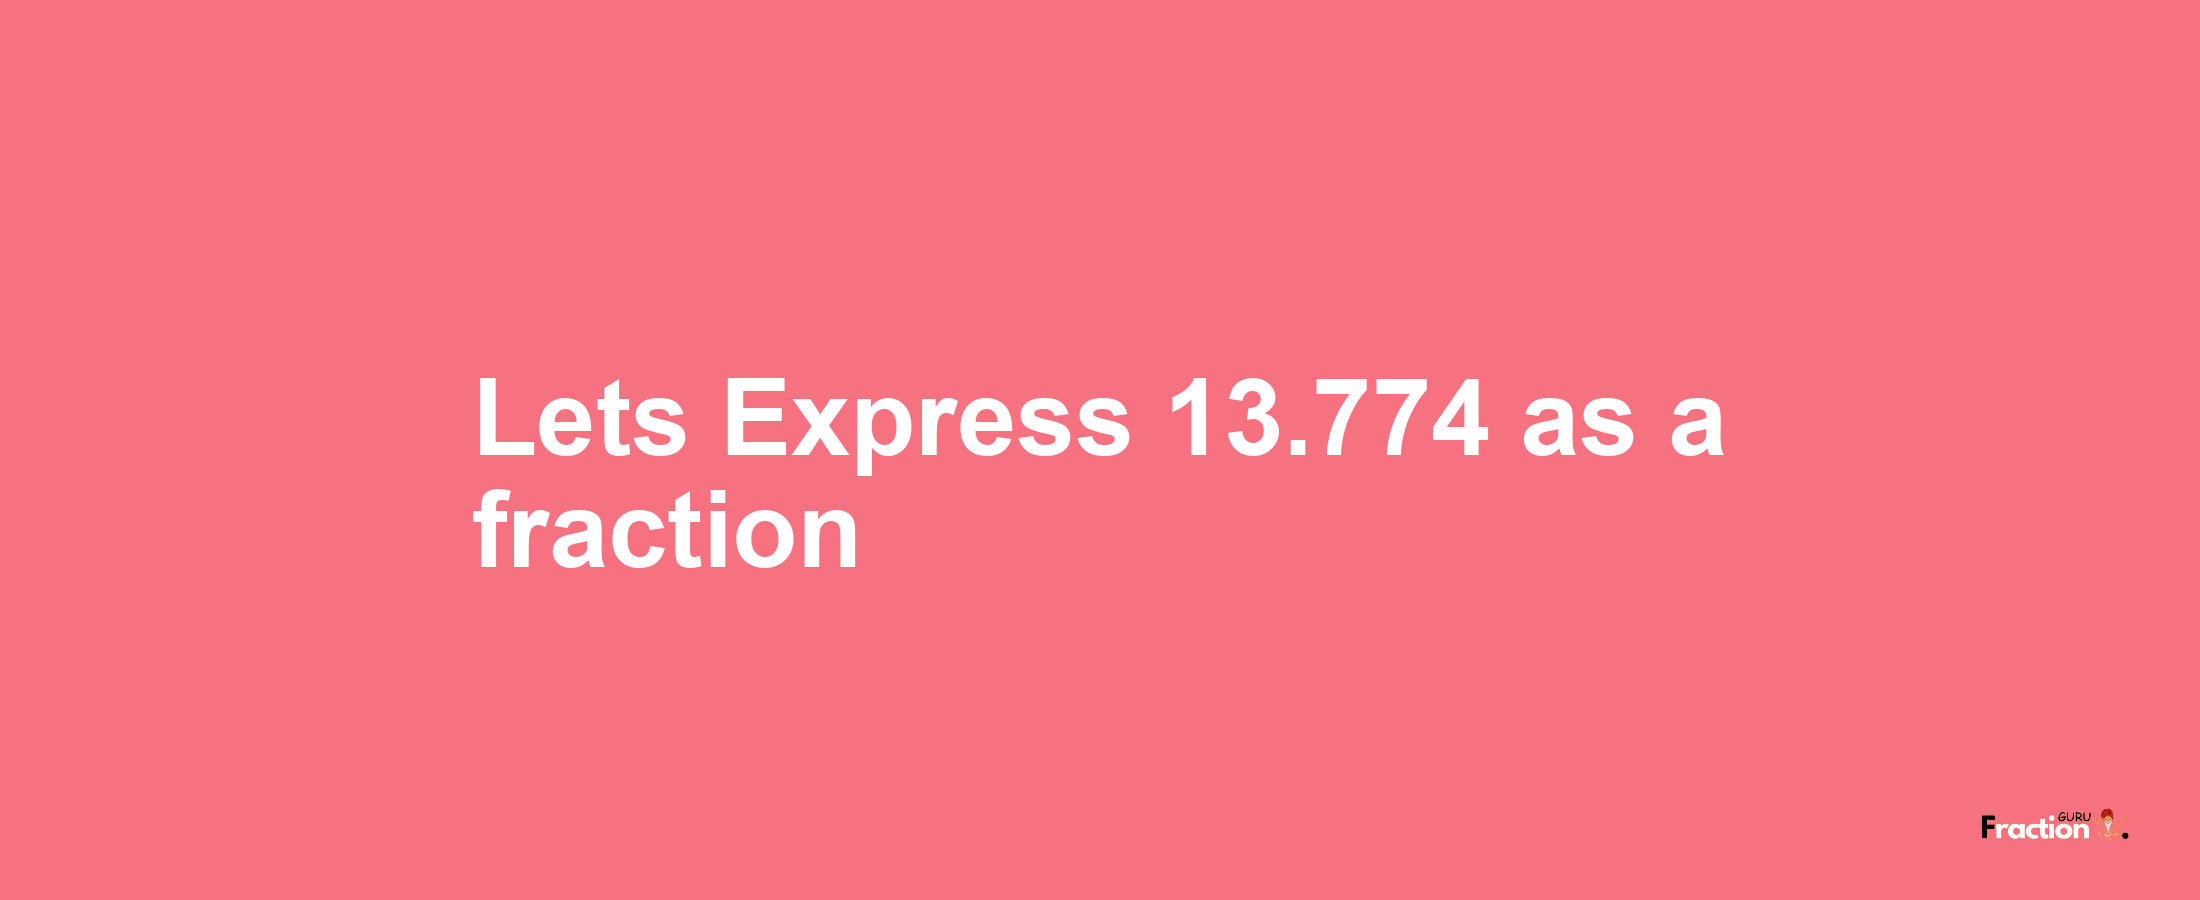 Lets Express 13.774 as afraction